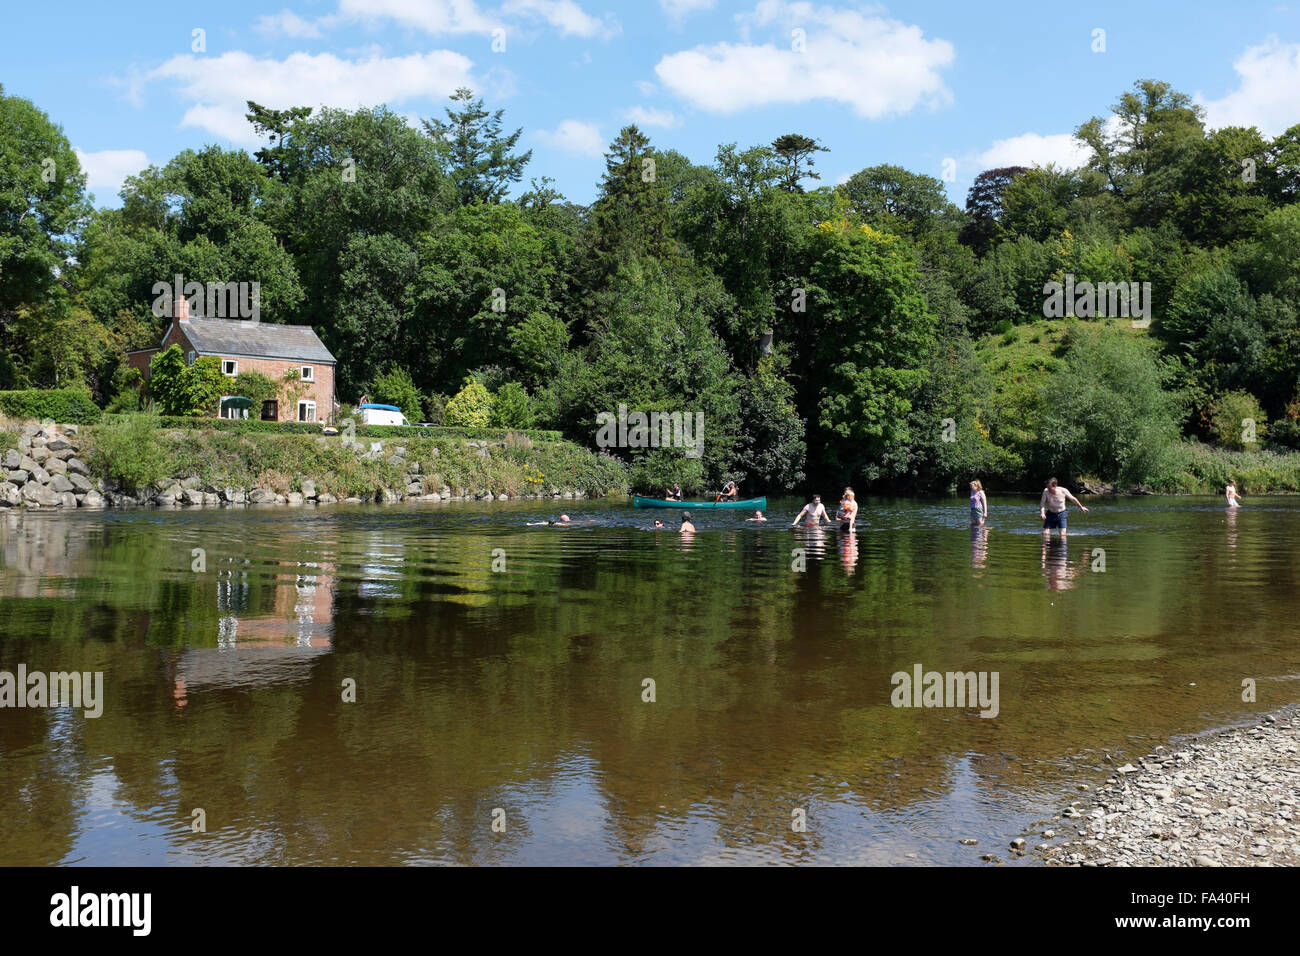 People enjoying paddling and swimming in the river Wye on the outskirts of the book town Hay-on-Wye, Powys, Wales Stock Photo